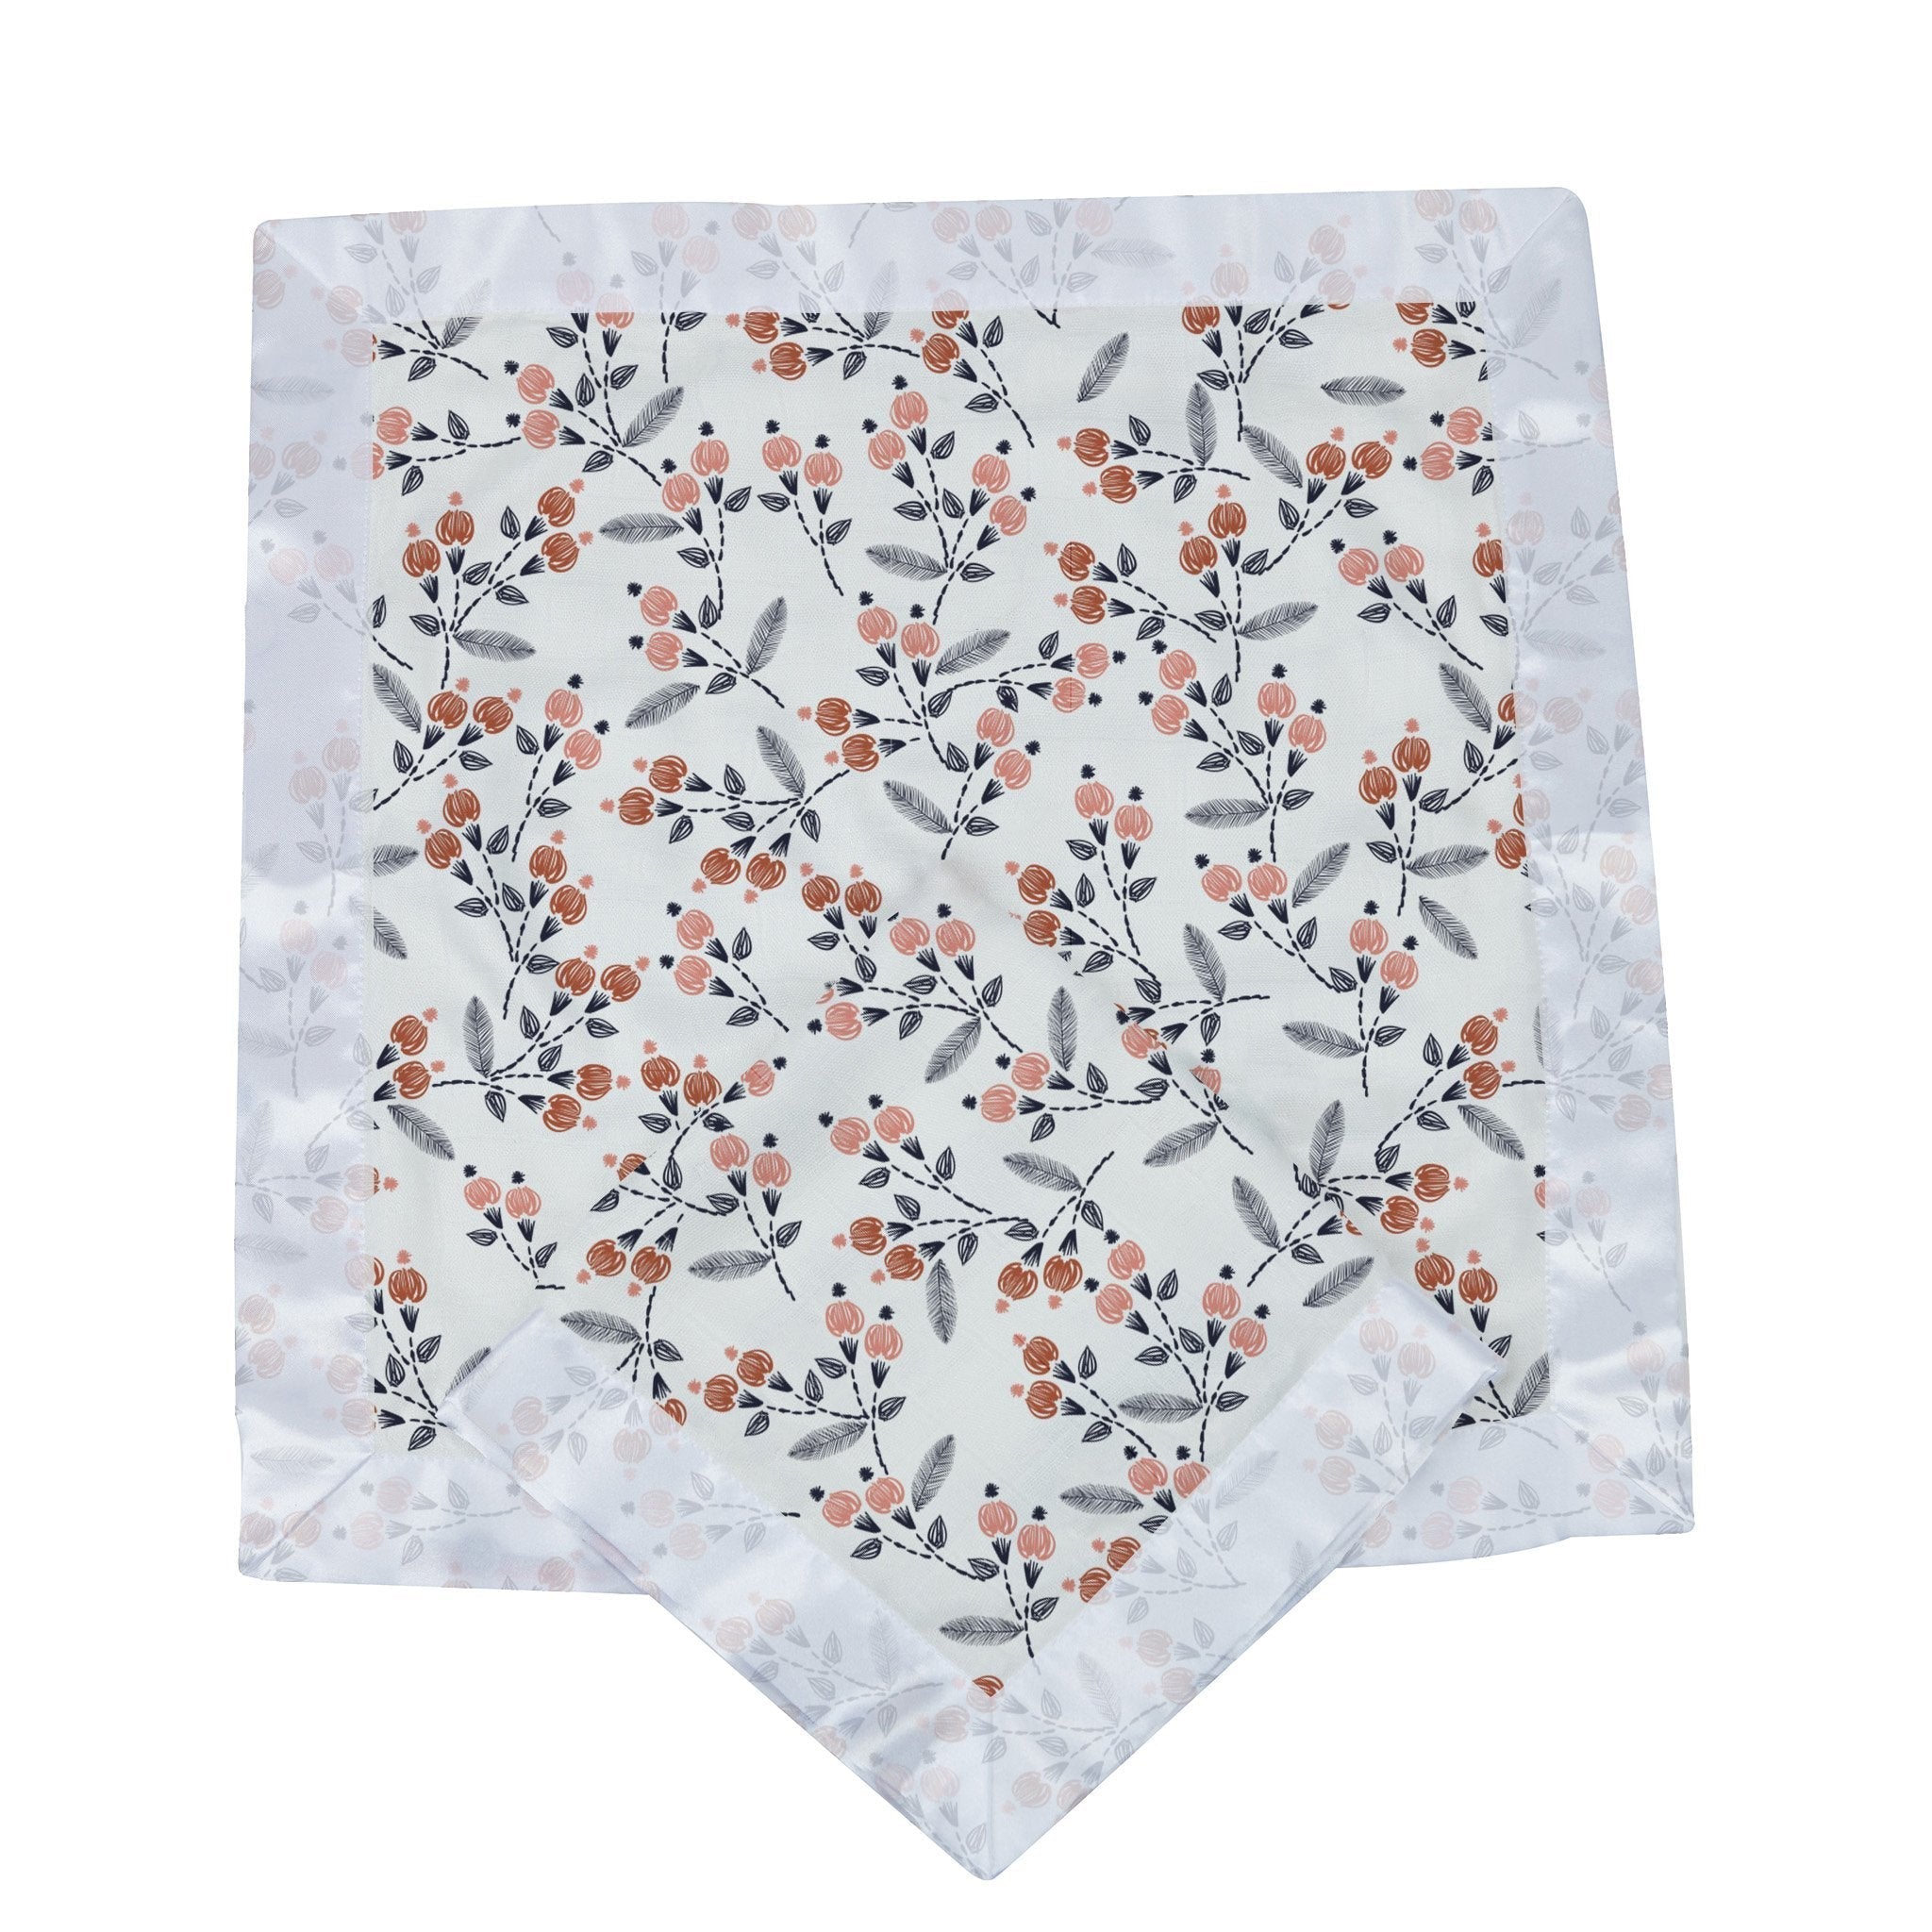 Beautiful baby security blankie with flowers